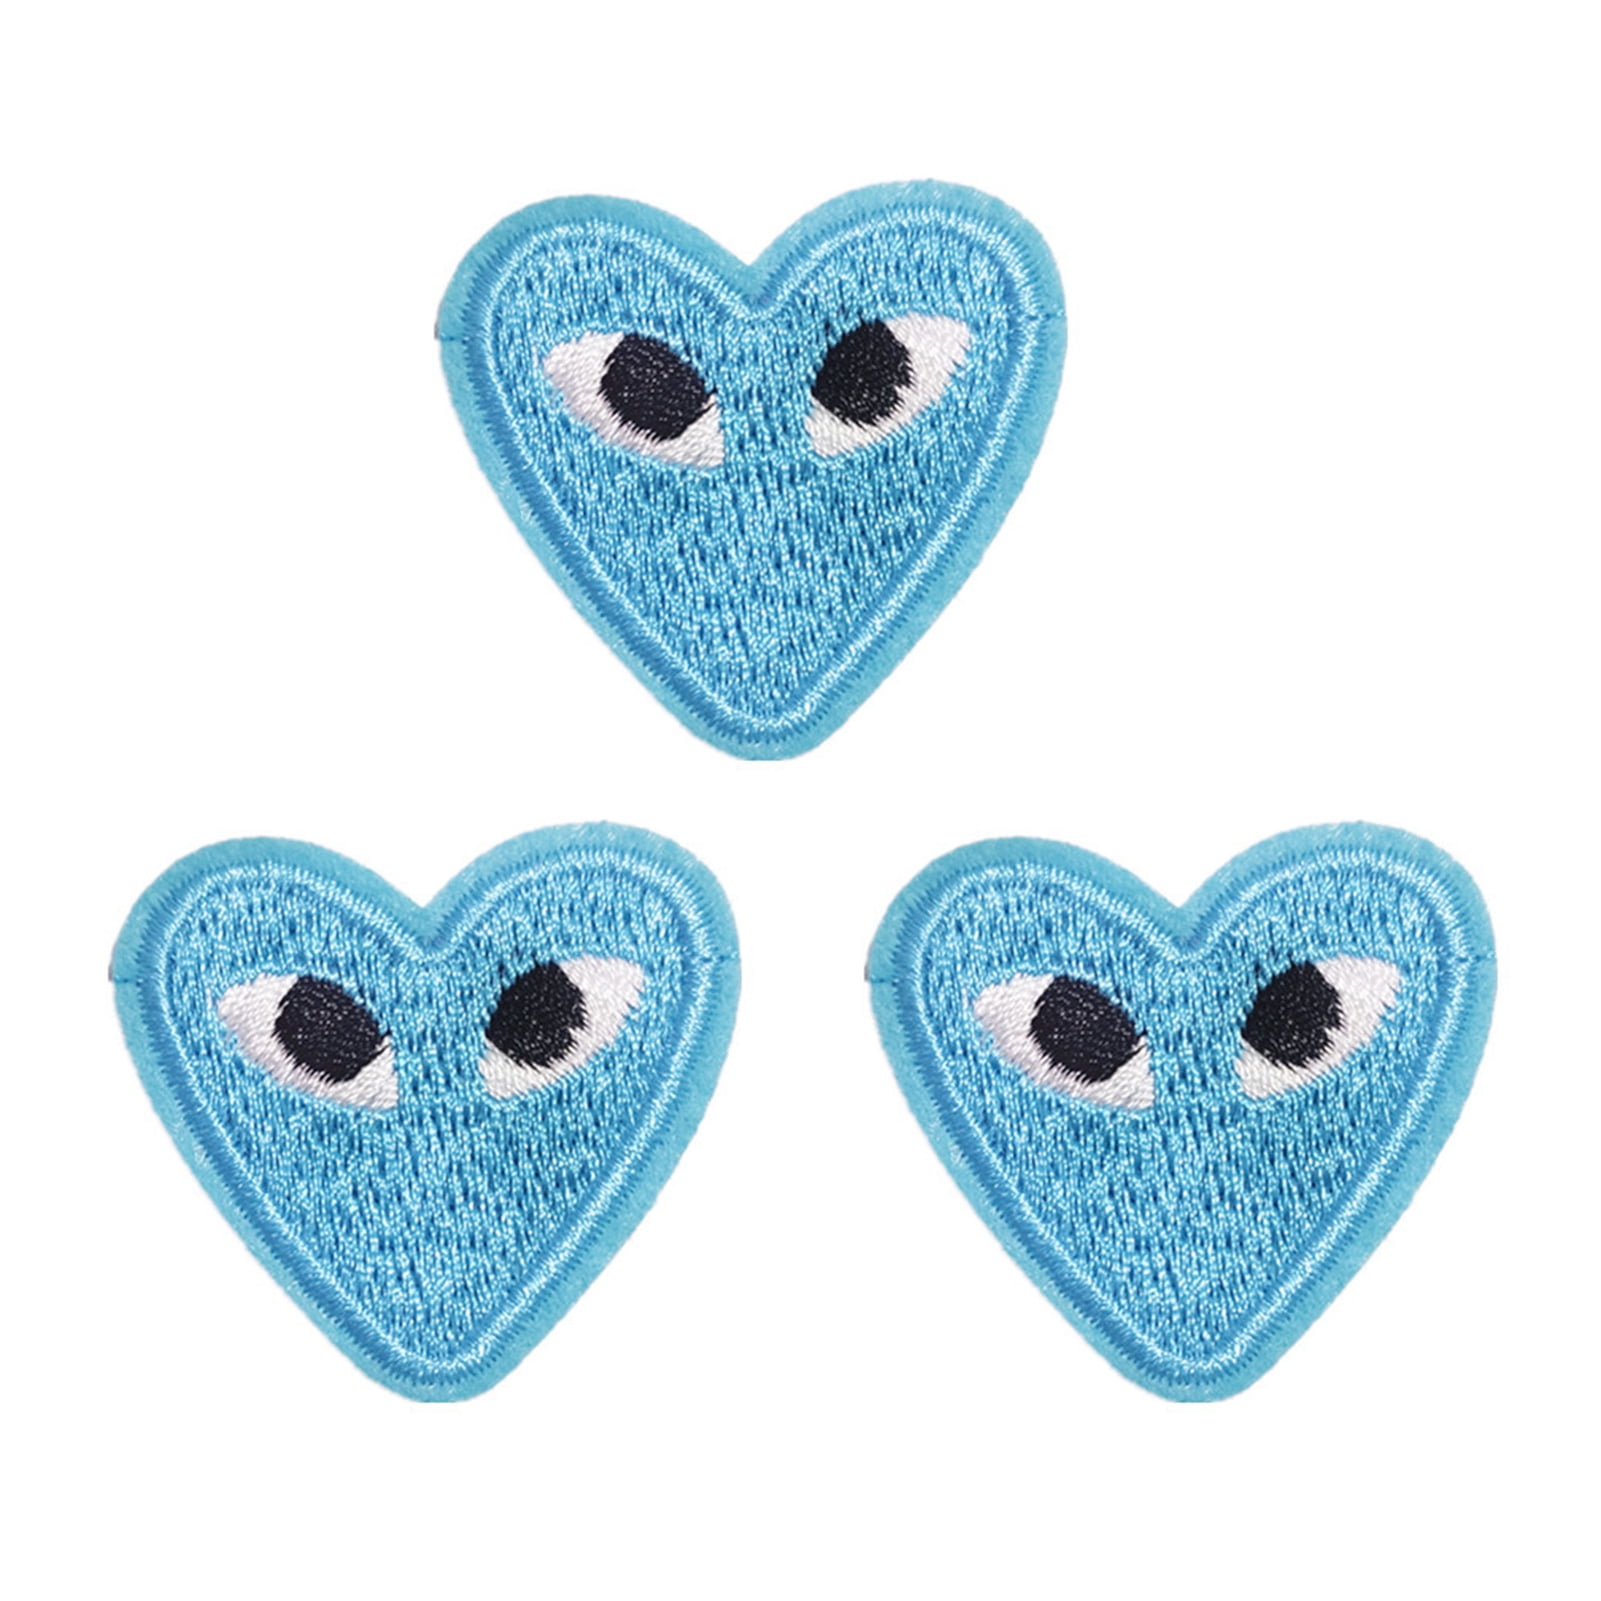 Iron On Patch Hearts 1" BLUE HEART 